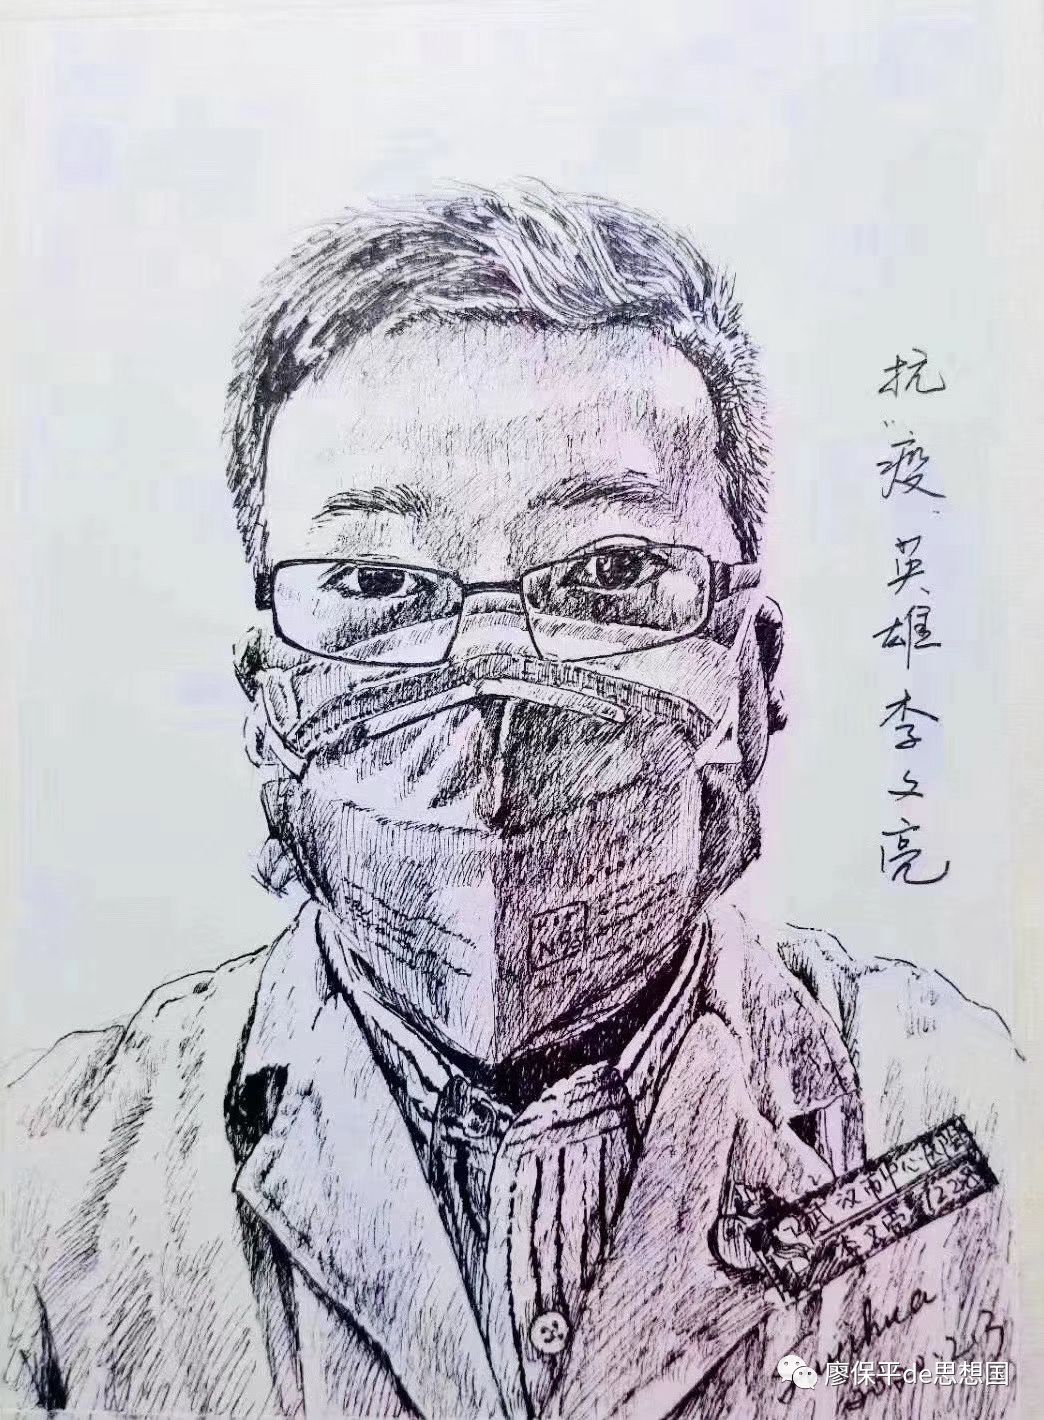 After four years, we continue to honor and remember the bravery of Dr. Li Wenliang, who first spoke out about the Covid virus.

Four years have passed, but we still pay tribute to the courageous actions of Dr. Li Wenliang, the first person to raise awareness about the Covid virus.